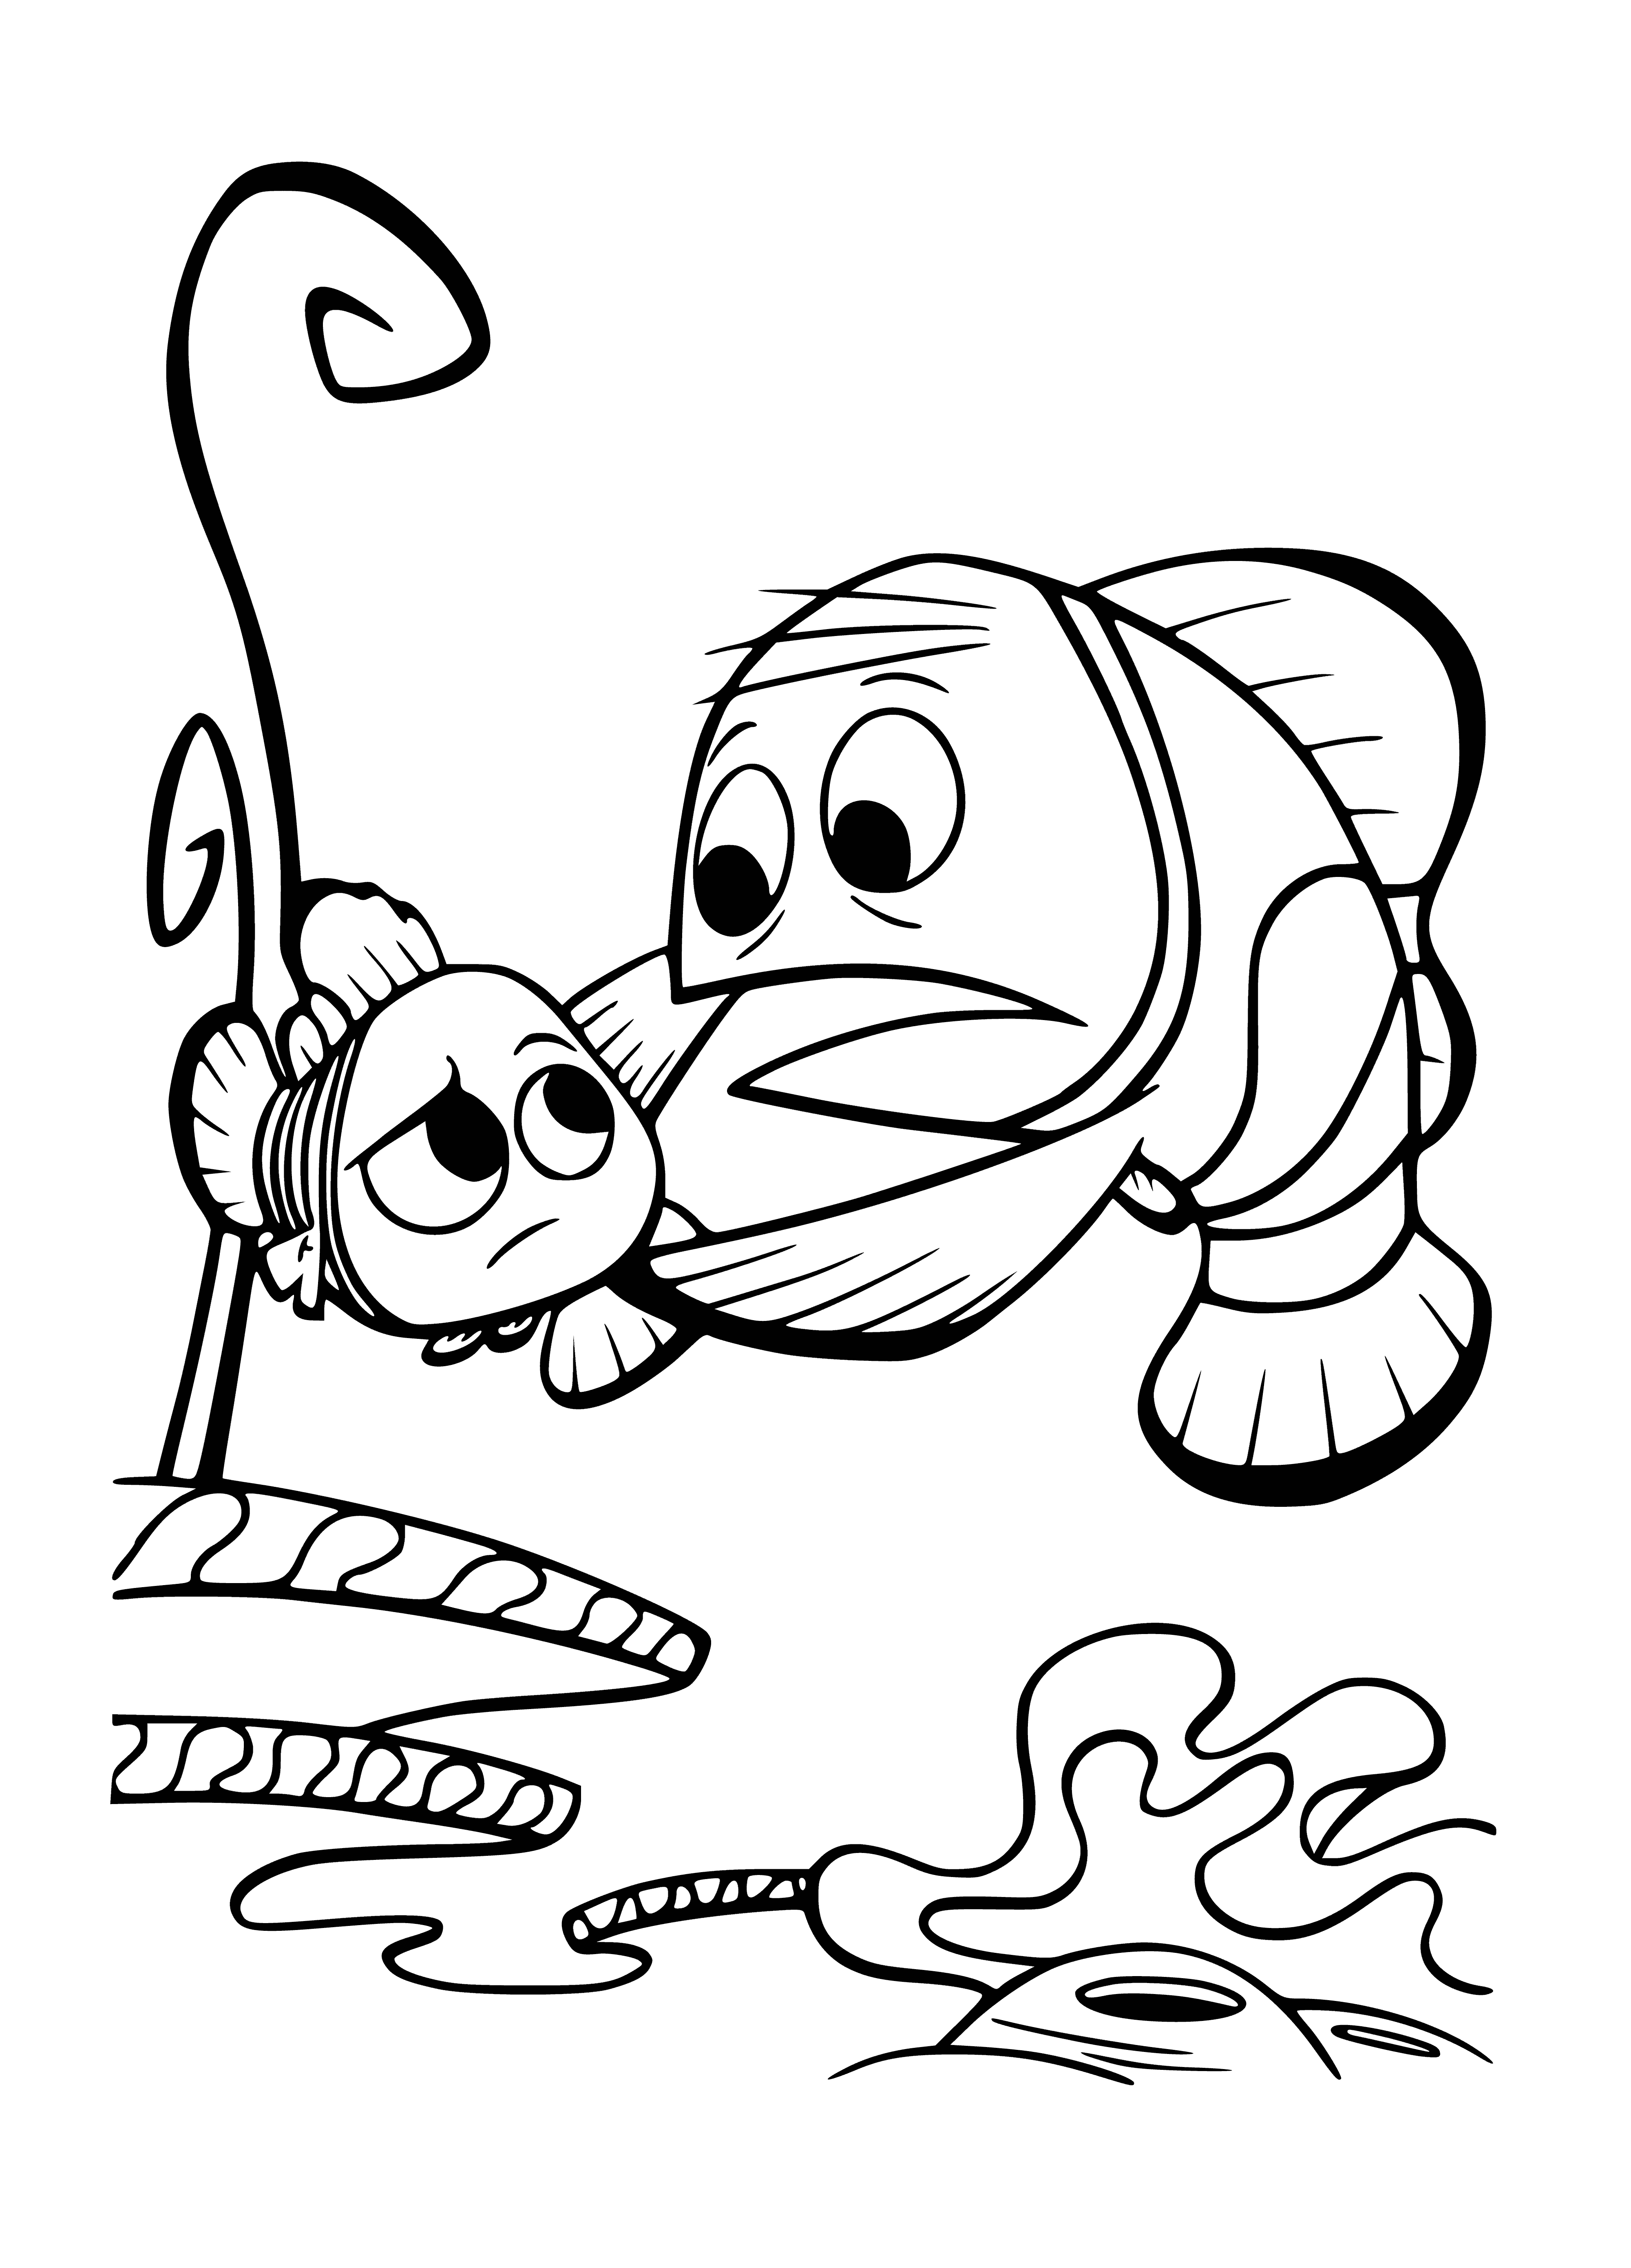 coloring page: Father and son share a proud, happy moment, sharing smiles and warm embraces. #FamilyLove